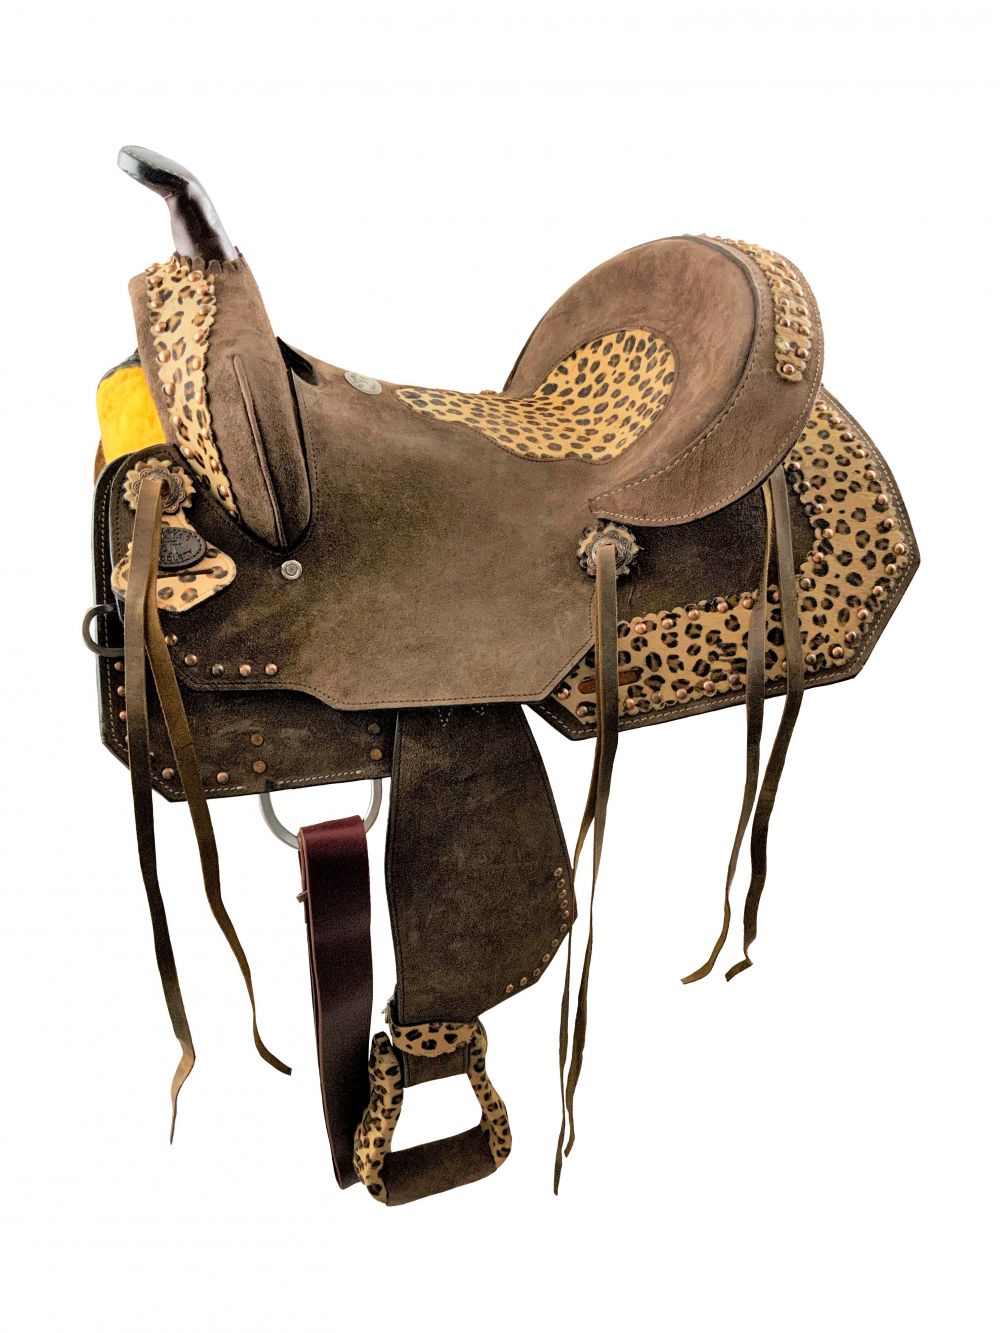 13" Double T Youth Hard Seat Barrel style saddle with Cheetah Seat